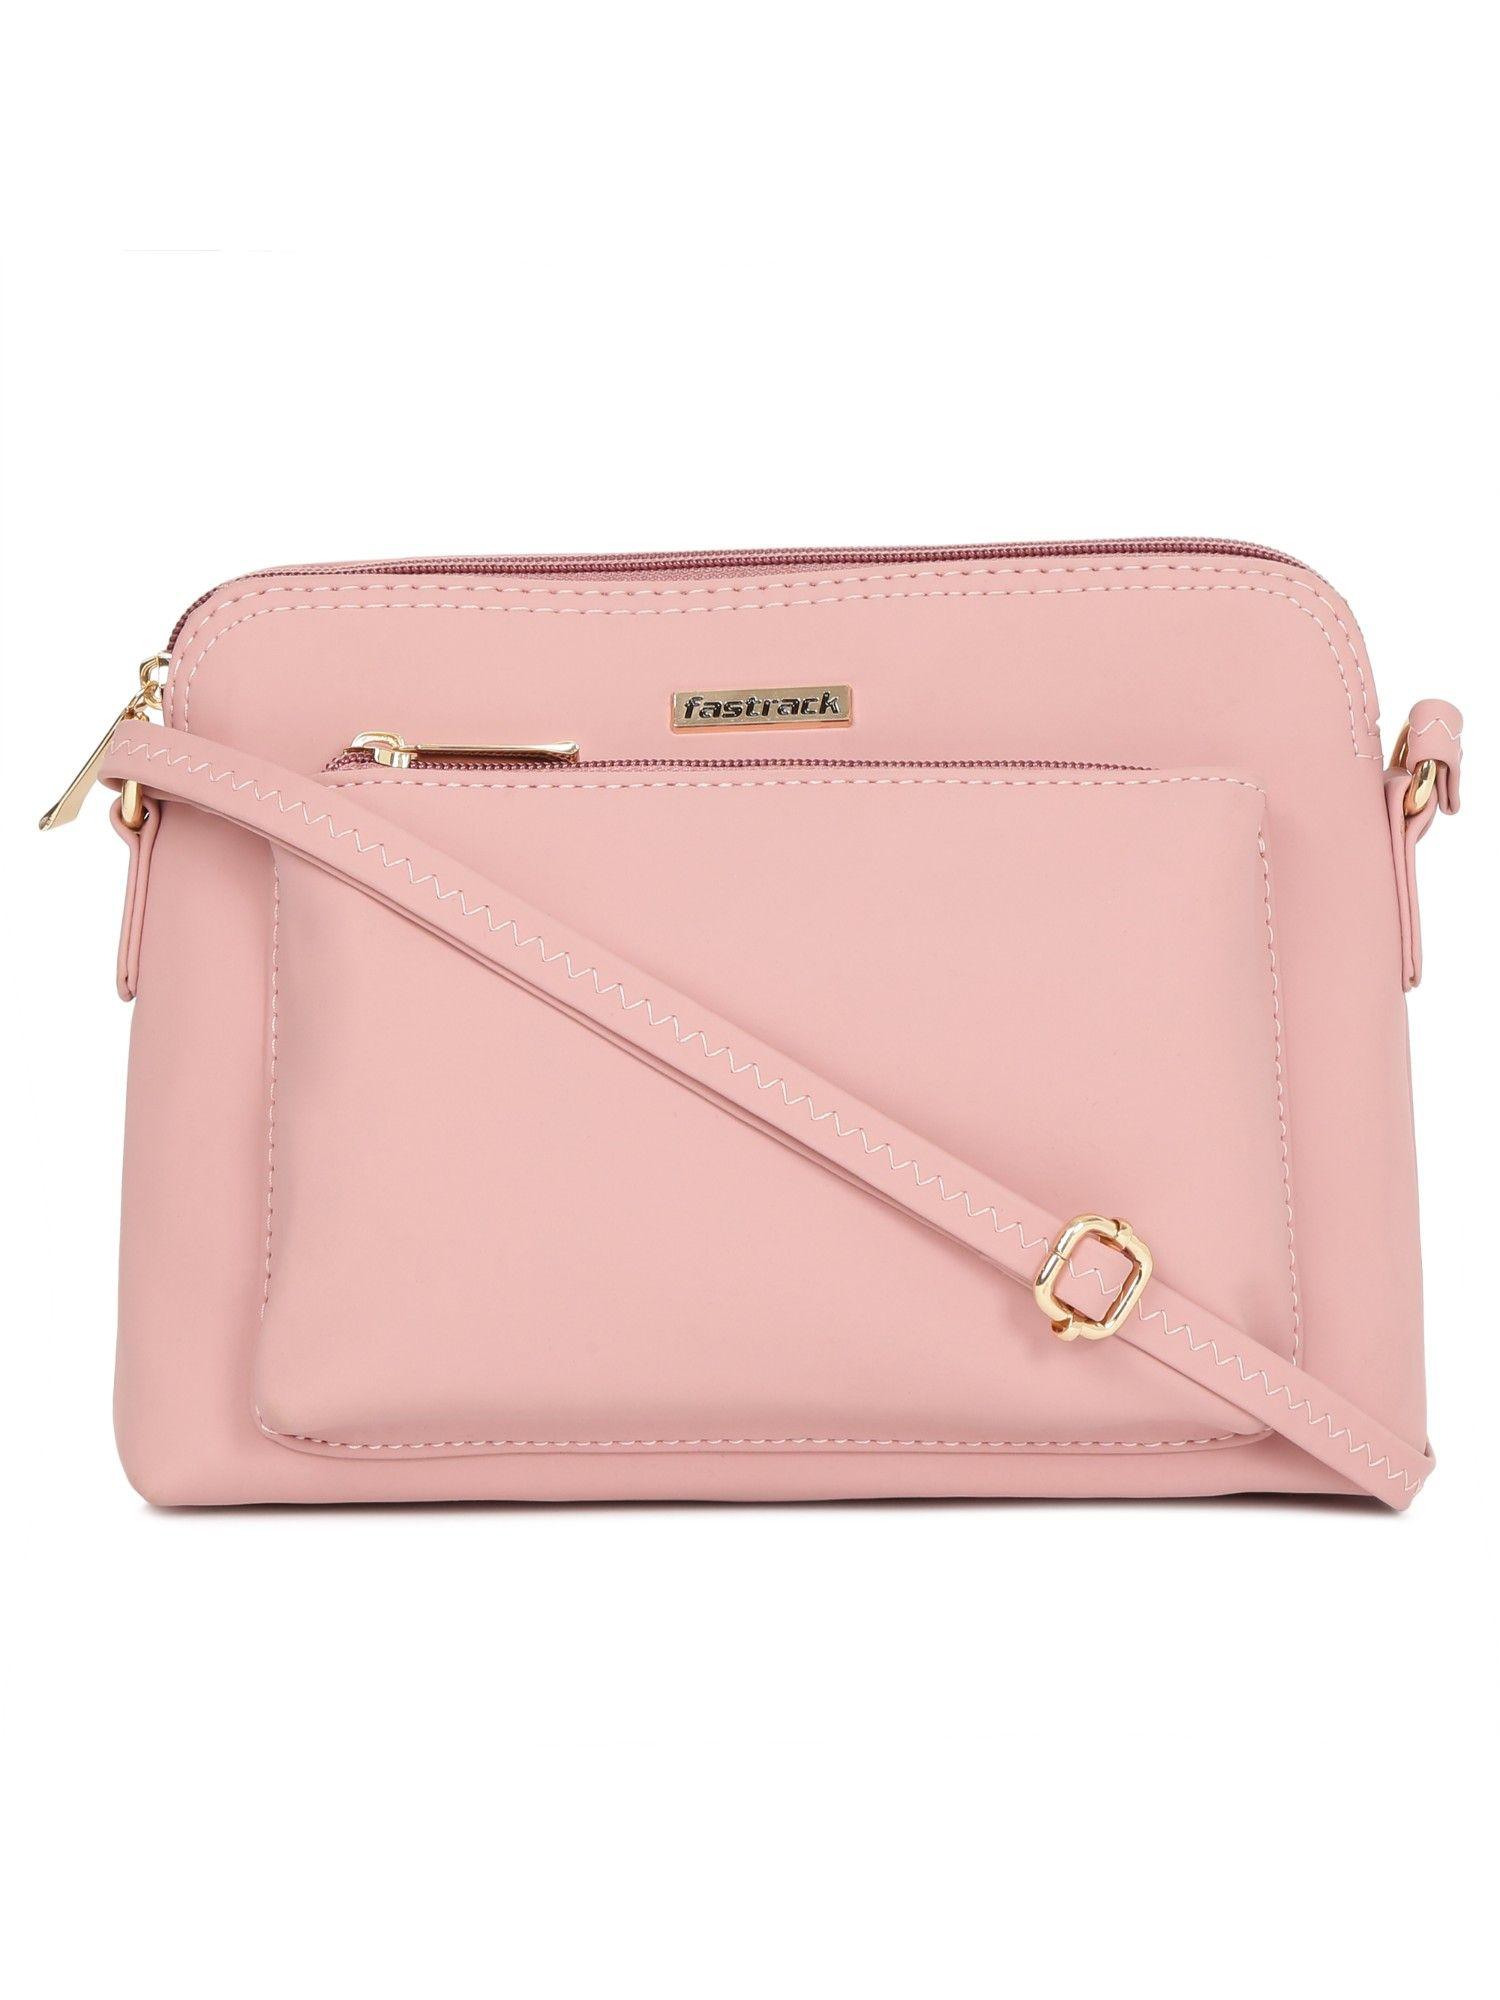 baby pink casual sling bag for women